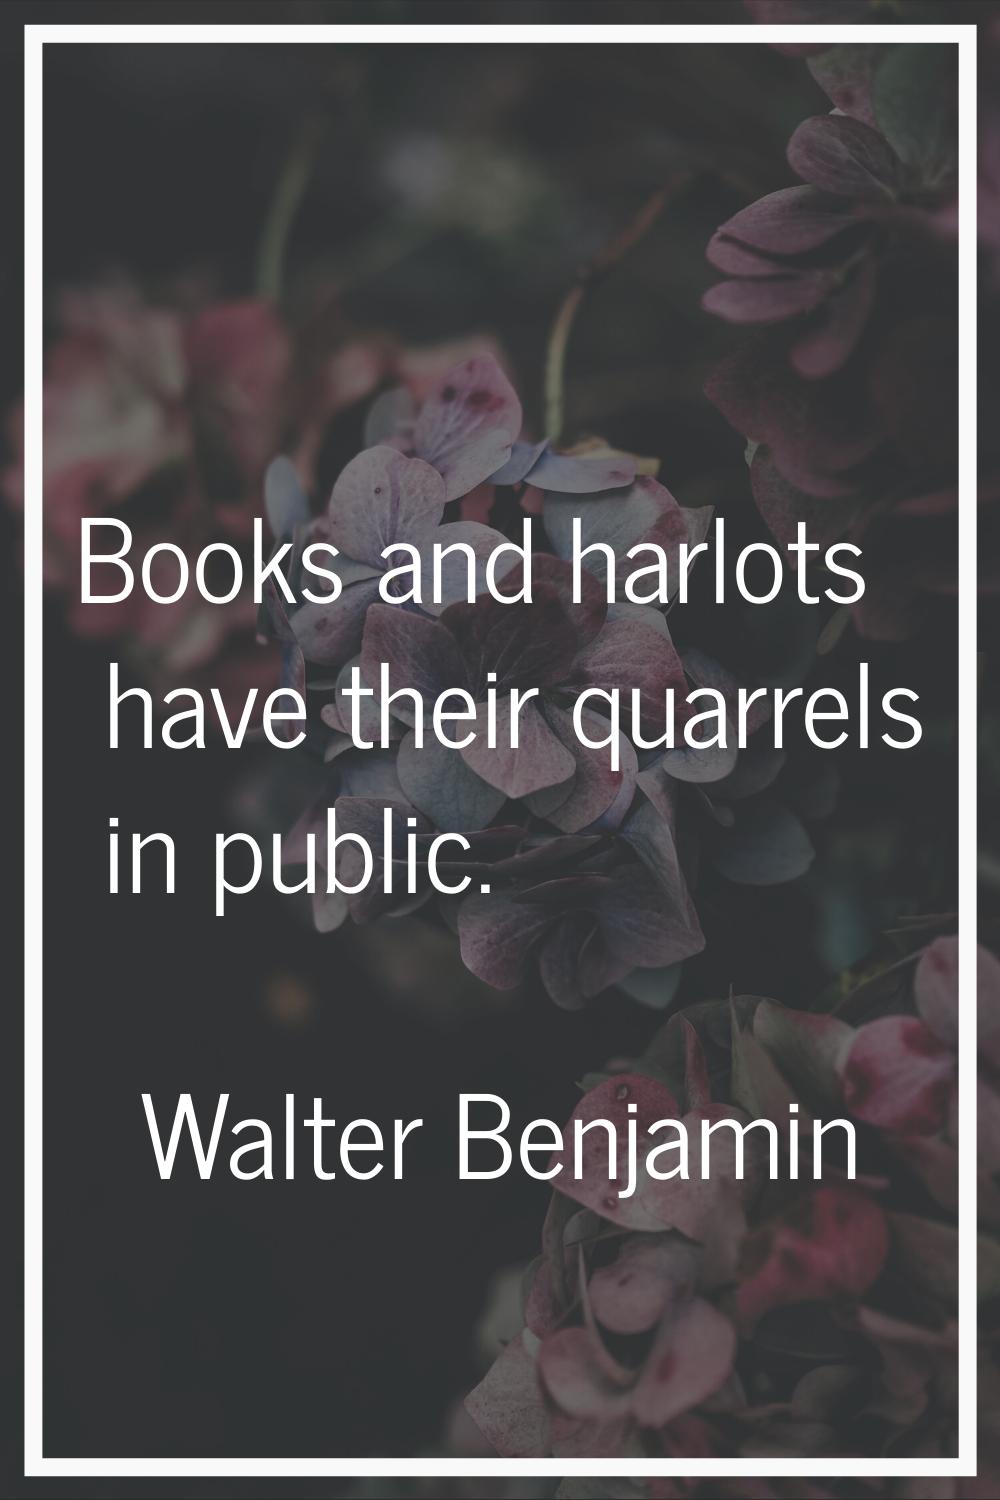 Books and harlots have their quarrels in public.